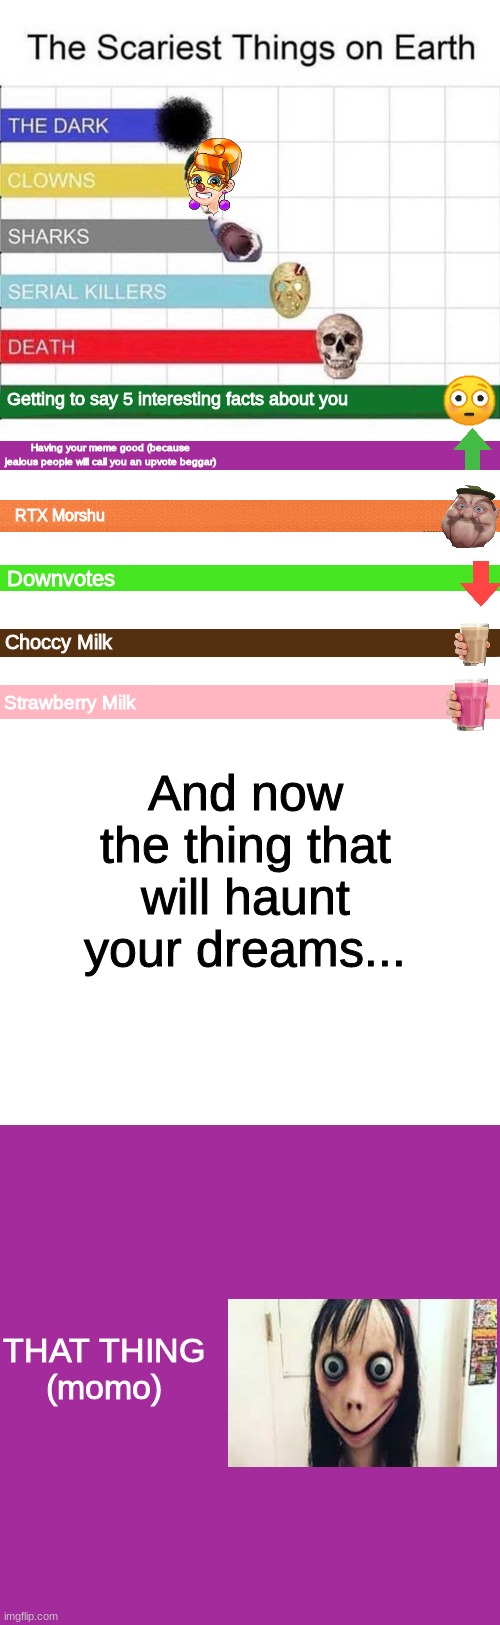 The Scariest Thing on EARTH | Getting to say 5 interesting facts about you; Having your meme good (because jealous people will call you an upvote beggar); RTX Morshu; Downvotes; Choccy Milk; And now the thing that will haunt your dreams... Strawberry Milk; THAT THING

(momo) | image tagged in blank white template,scary,arms,momo,nightmares | made w/ Imgflip meme maker